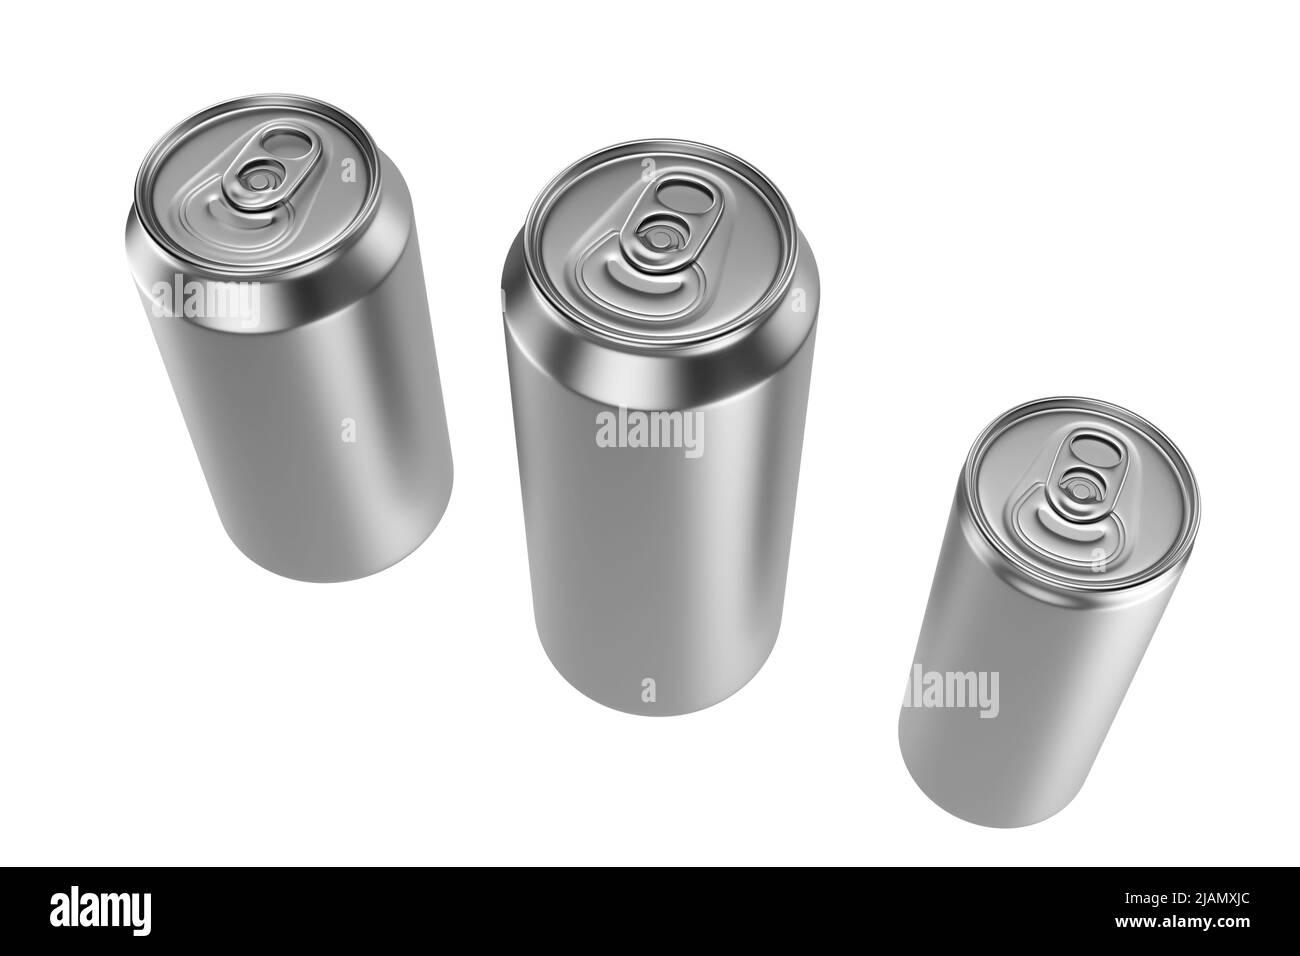 https://c8.alamy.com/comp/2JAMXJC/aluminium-beer-and-slim-soda-can-mock-up-blank-template-juice-soda-beer-jar-blank-isolated-on-white-background-aluminum-can-for-design-realistic-aluminum-cans-3d-rendering-2JAMXJC.jpg